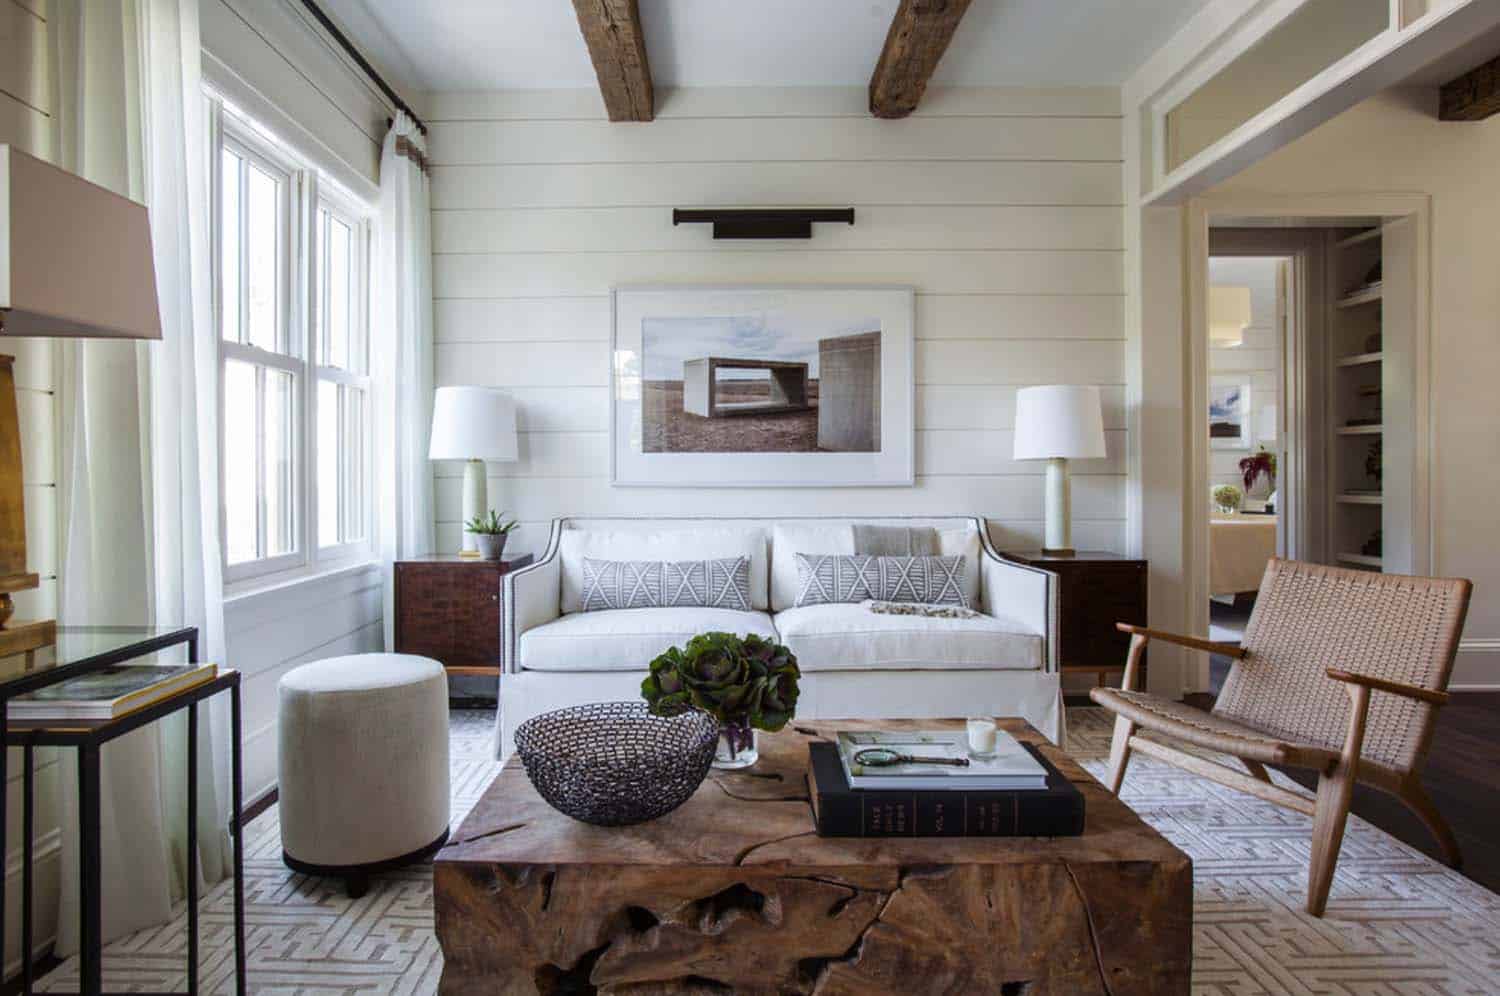 Cottage Style Guest House-Marie Flanigan Interiors-03-1 Kindesign